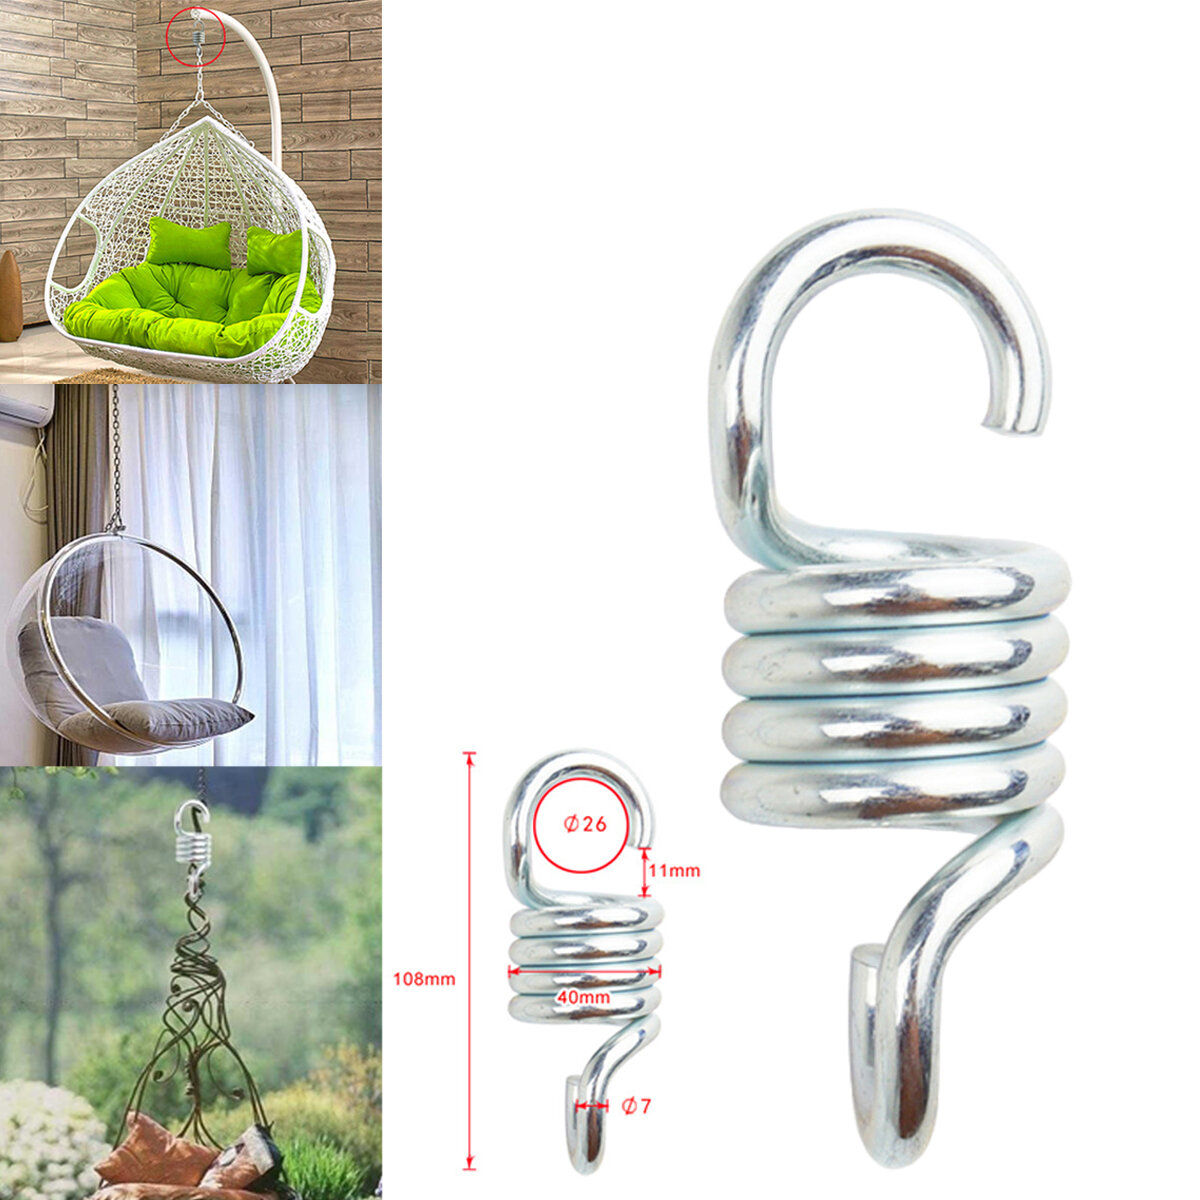 304 Steel Extension Spring Weight Capacity 300kg For Hammock Chair Swing